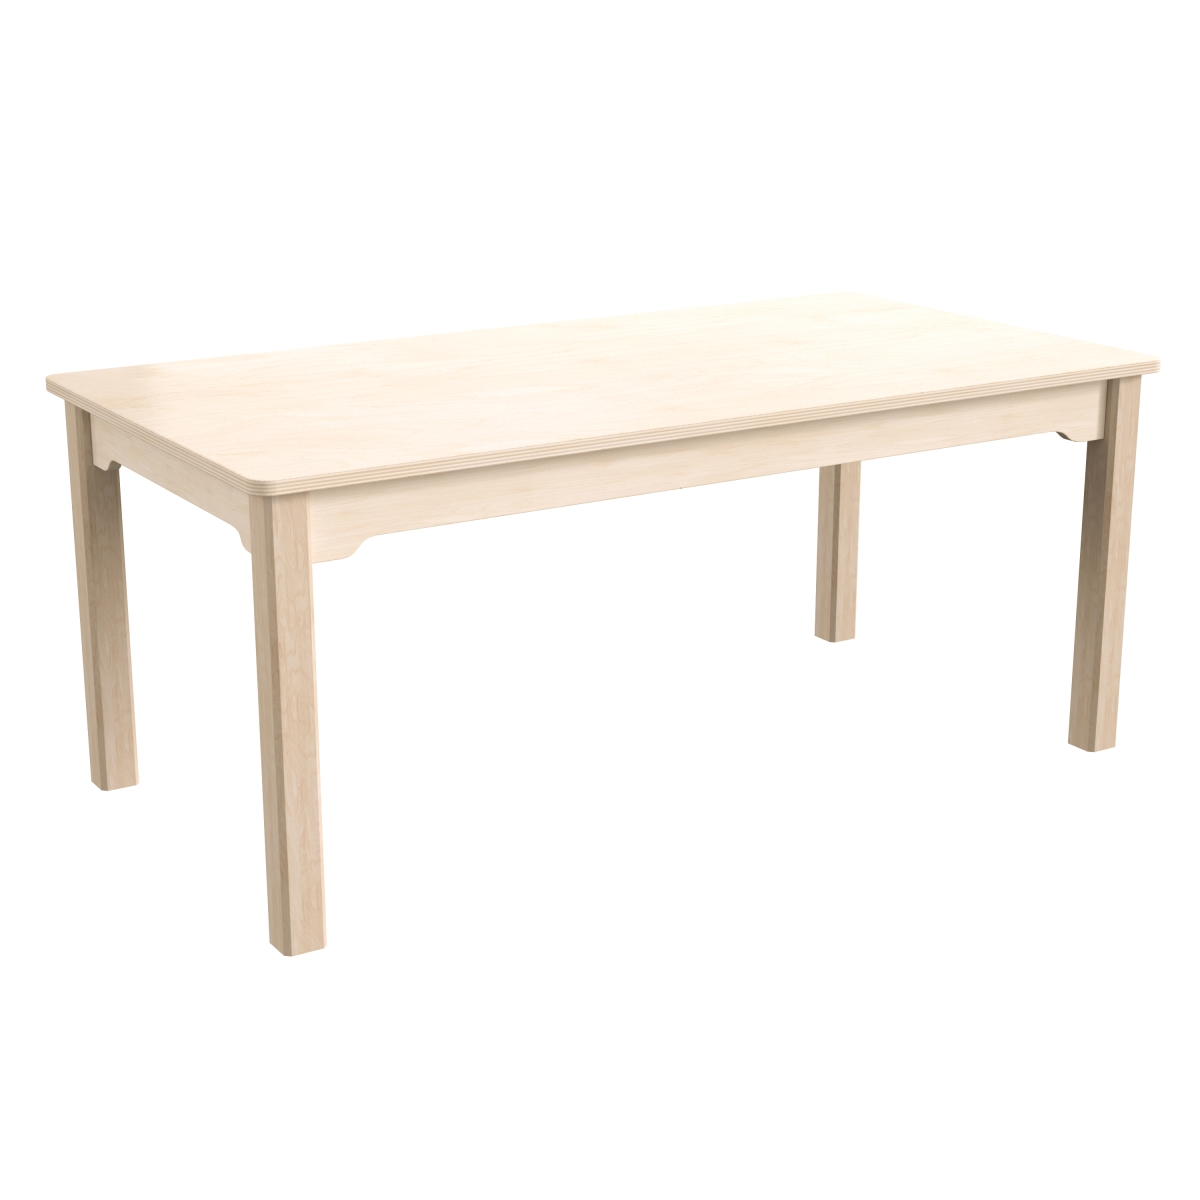 Picture of Flash Furniture MK-ME088011-GG 23.5 x 47.25 x 18 in. Bright Beginnings Commercial Grade Wooden Rectangular Preschool Classroom Activity Table, Beech